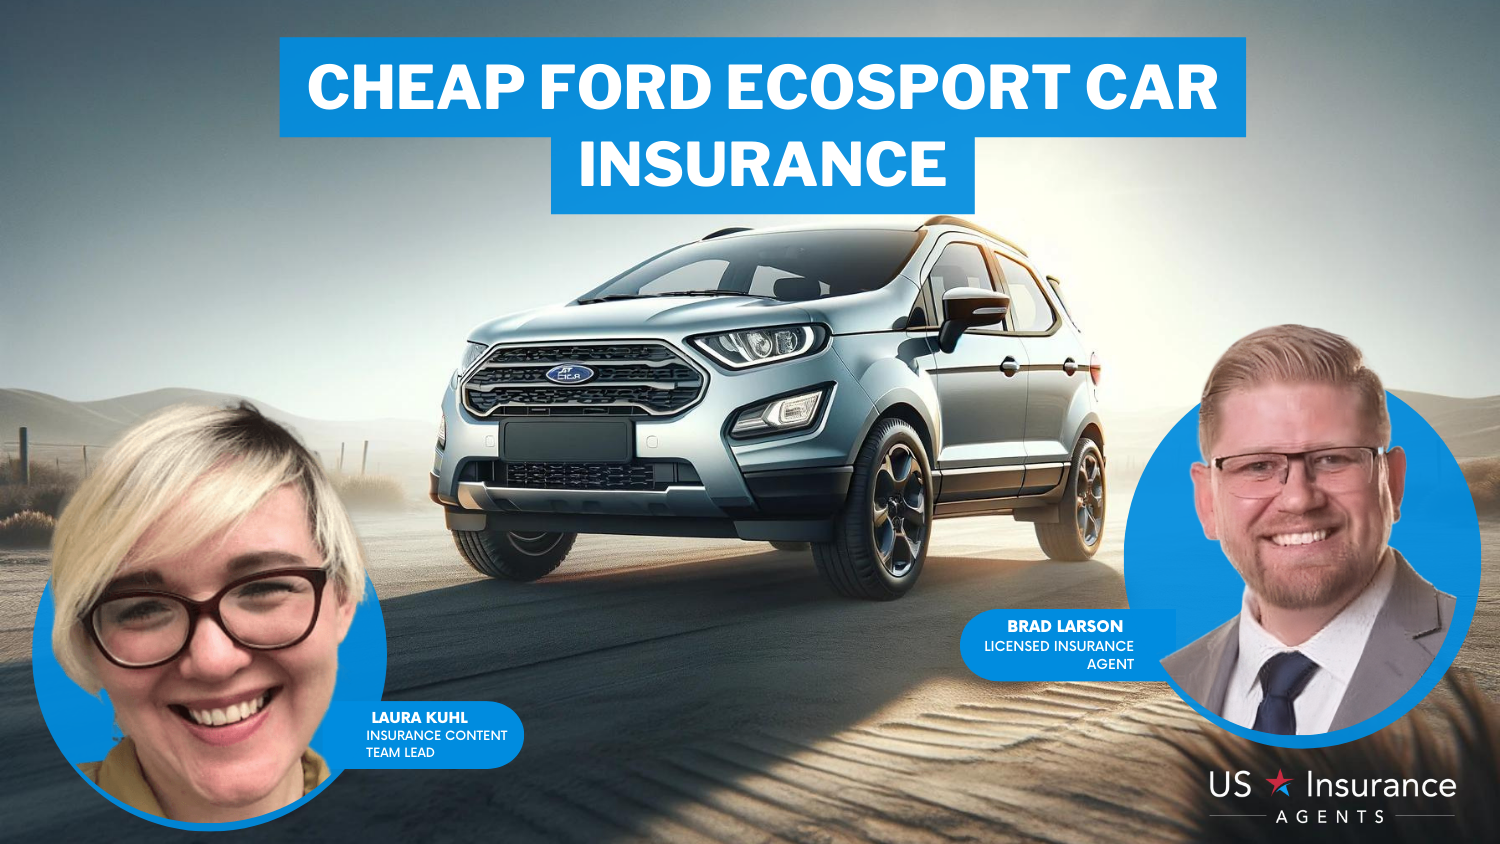 Cheap Ford EcoSport Car Insurance: Nationwide, State Farm, and USAA